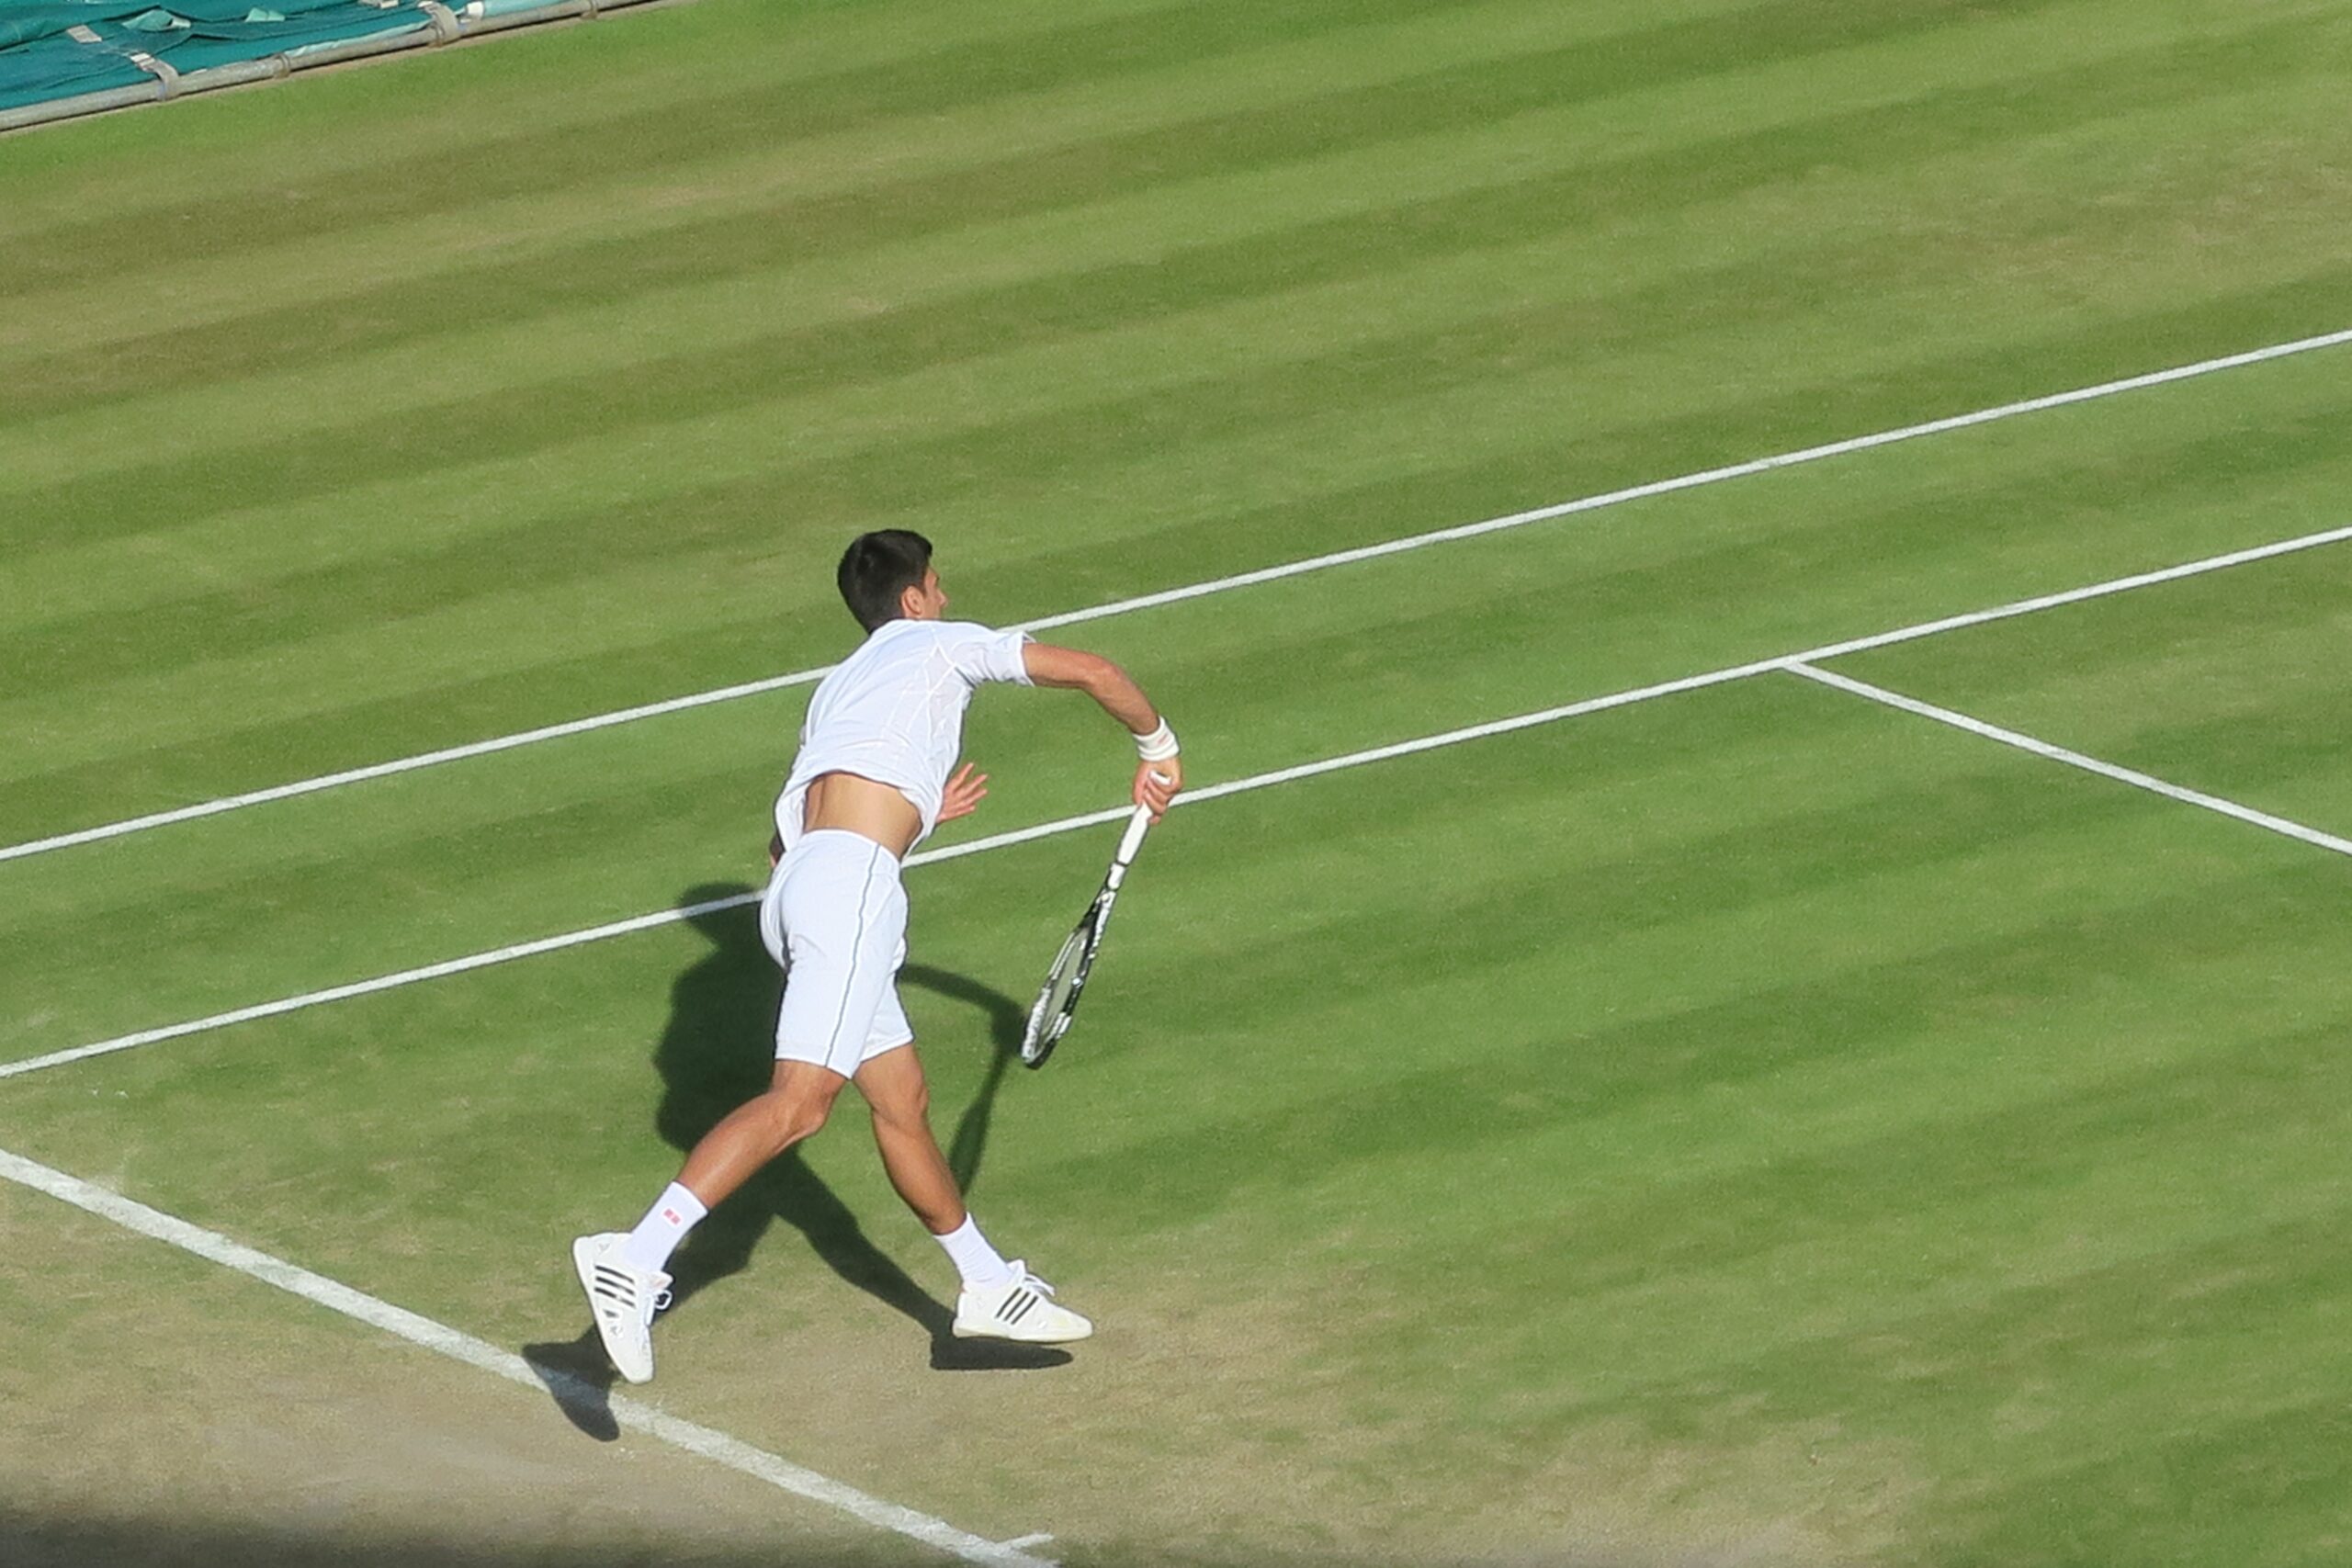 Novak Djokovic playing tennis on a grass court. He is one of the most common answers to who will win Wimbledon this year.